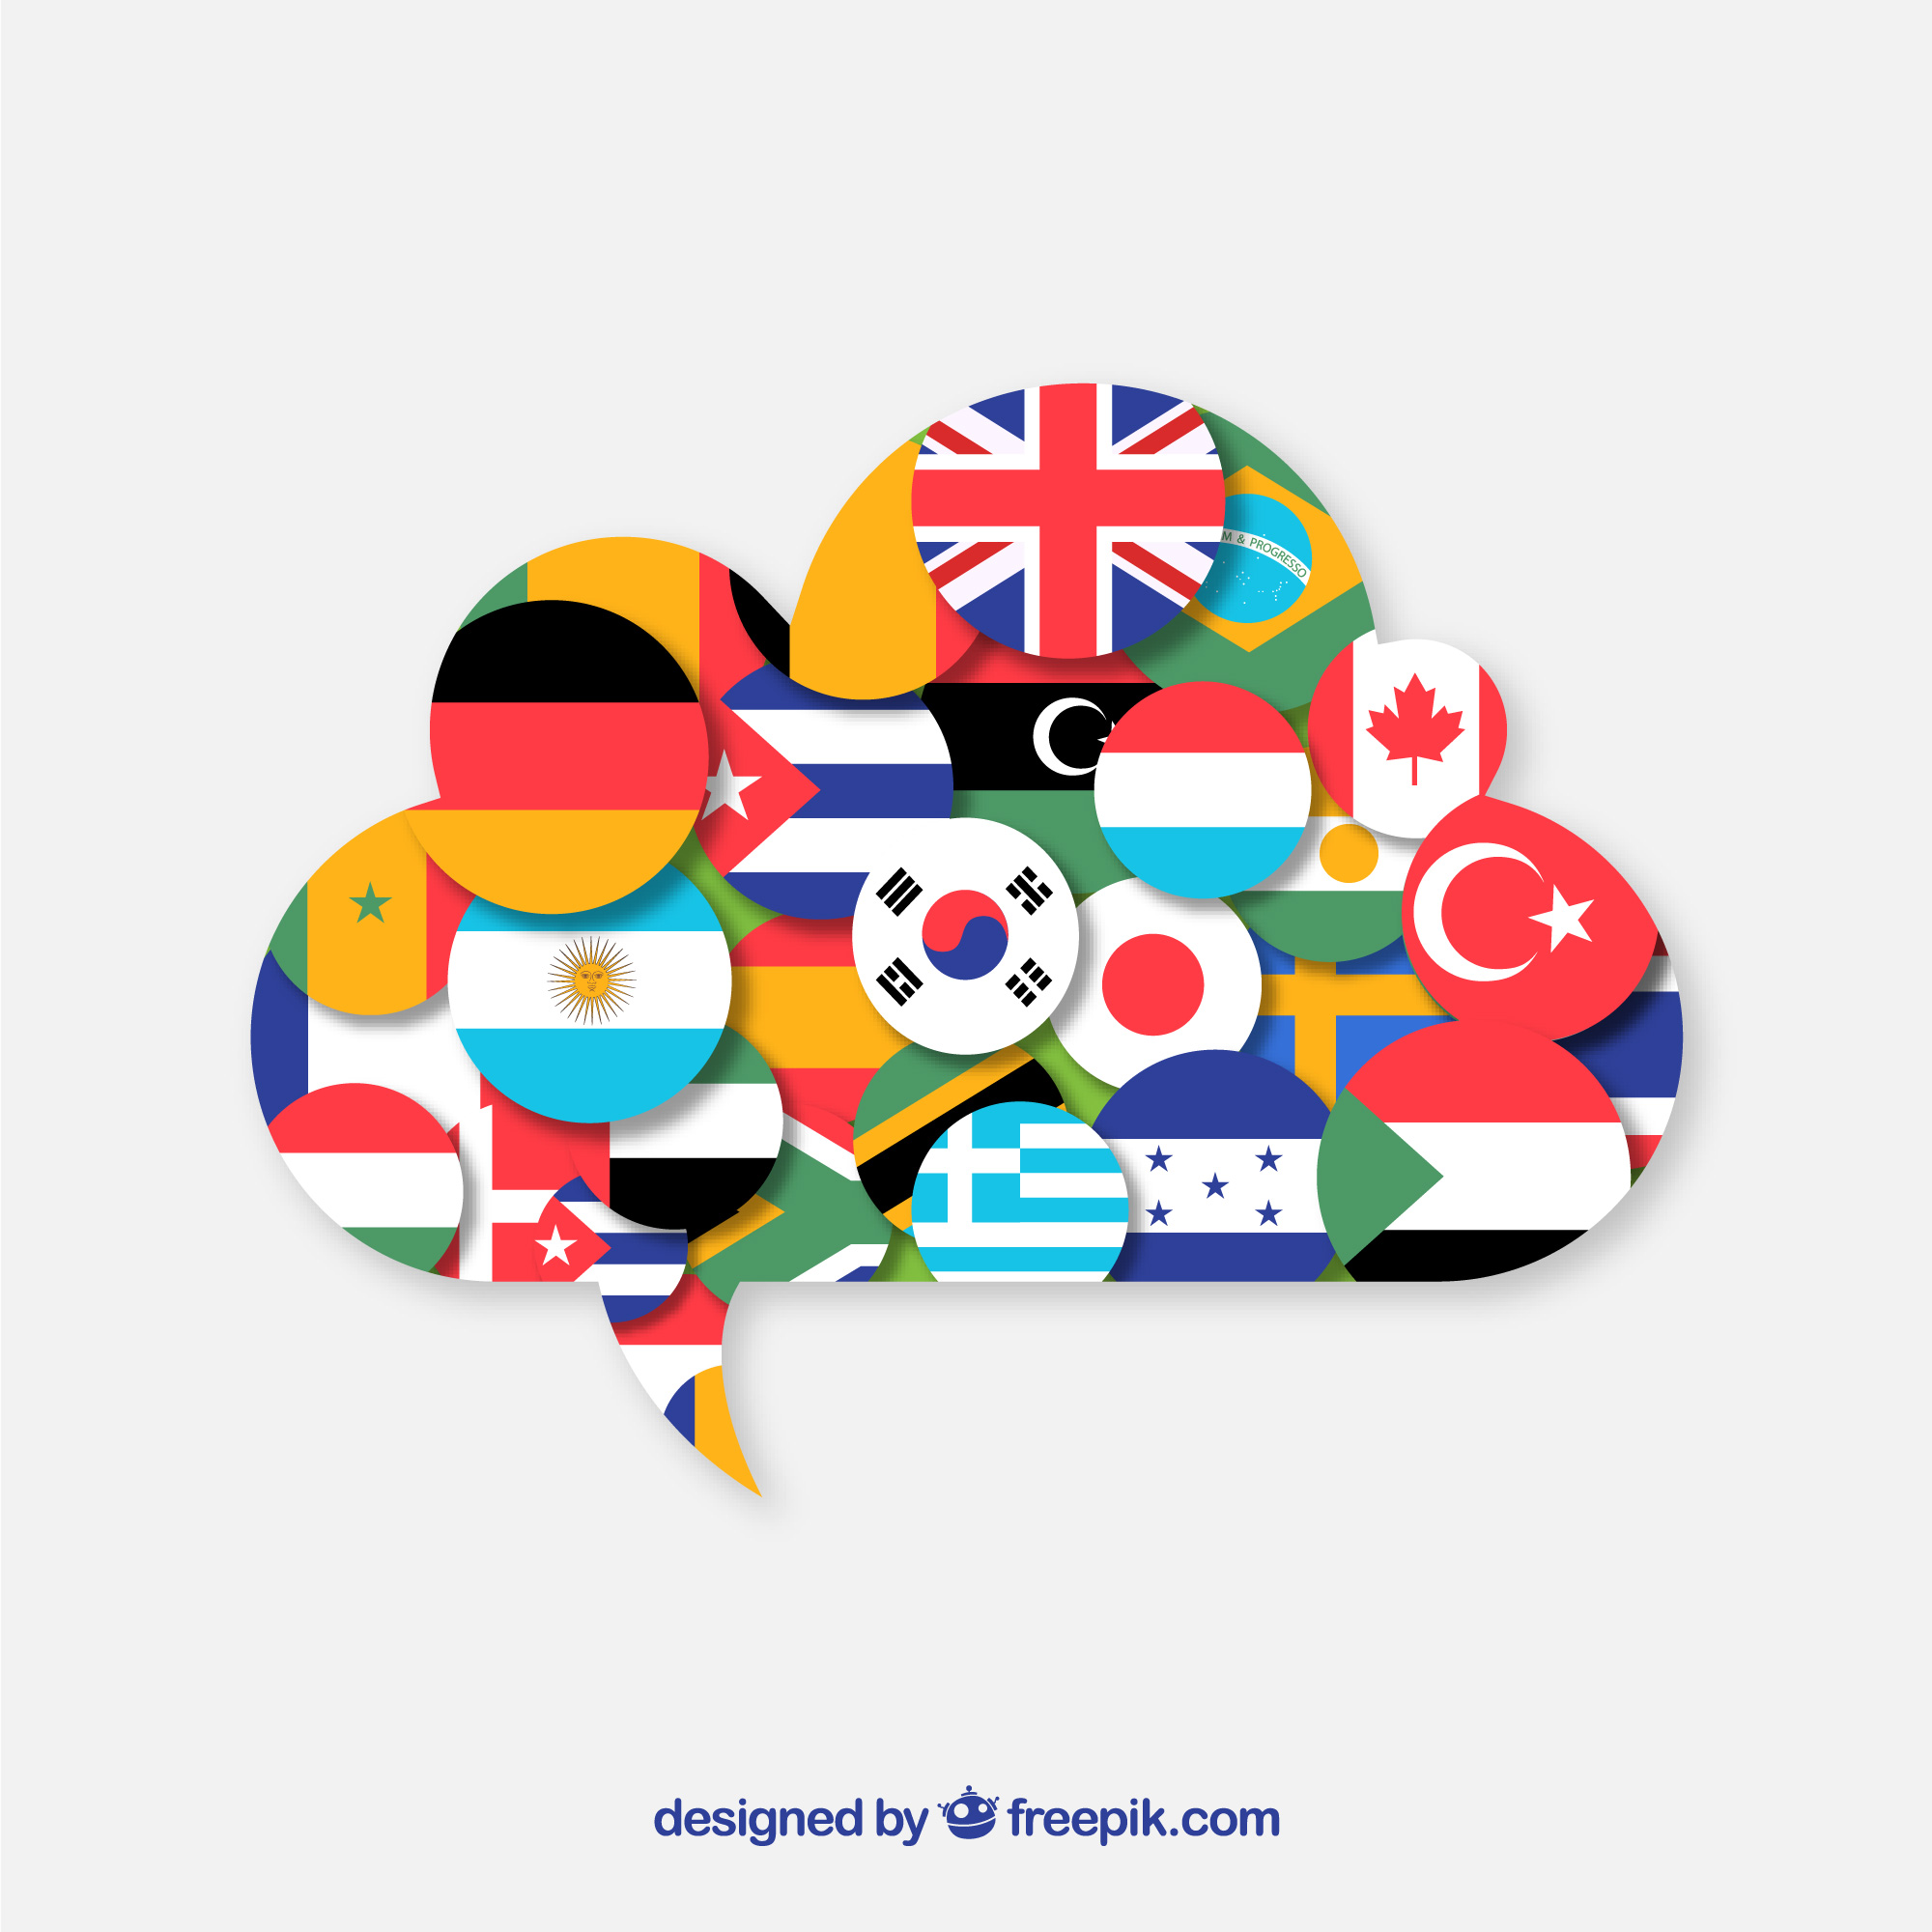 Speech Bubble with flags - Image by Freepik